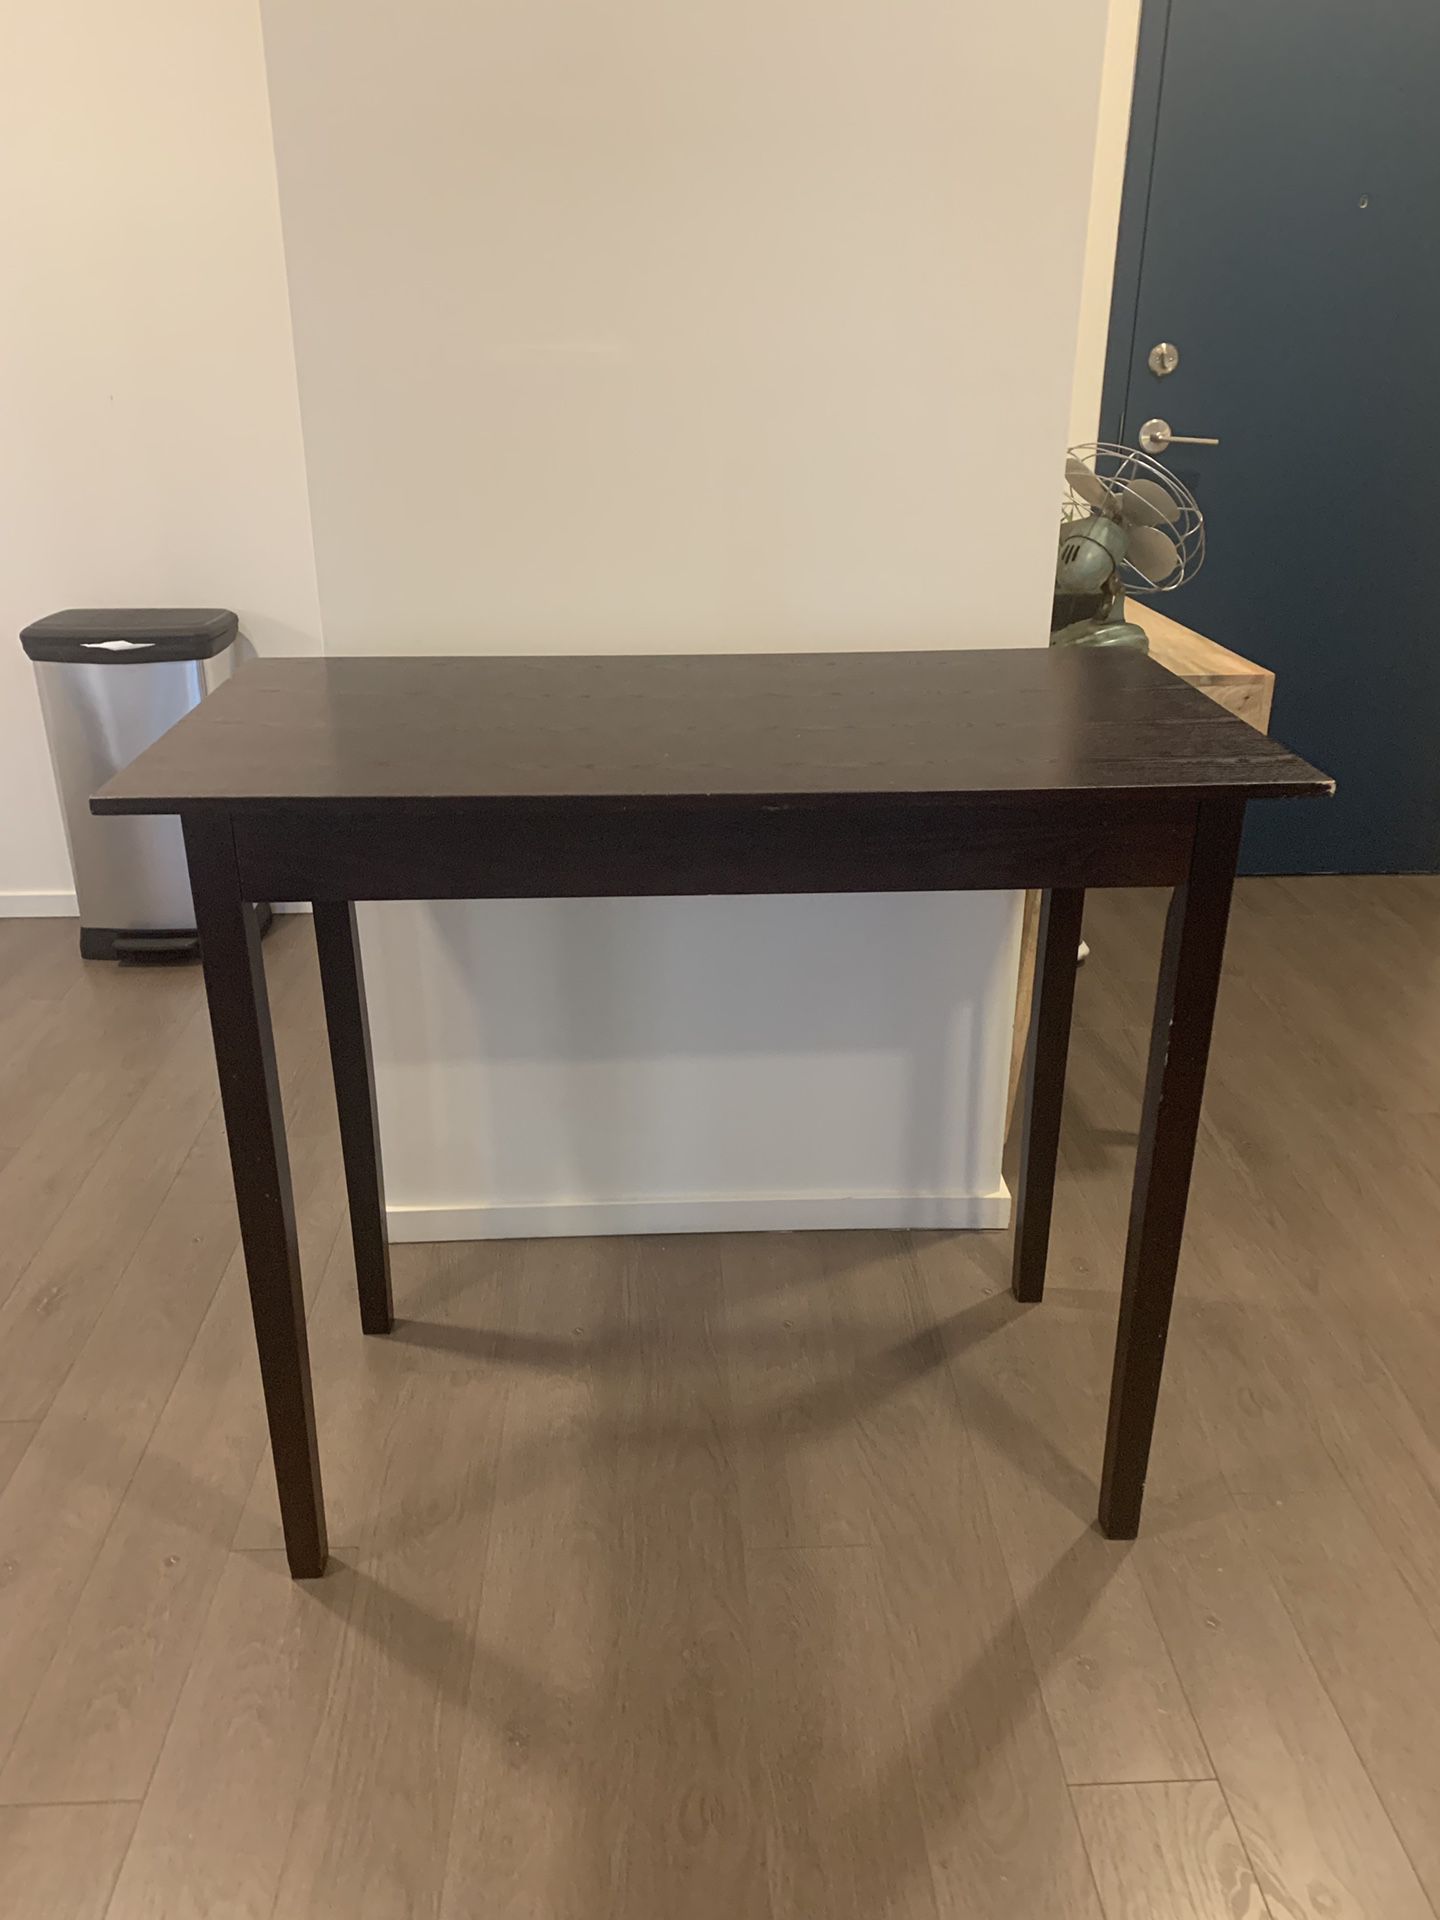 Counter height table $25.00 OBO